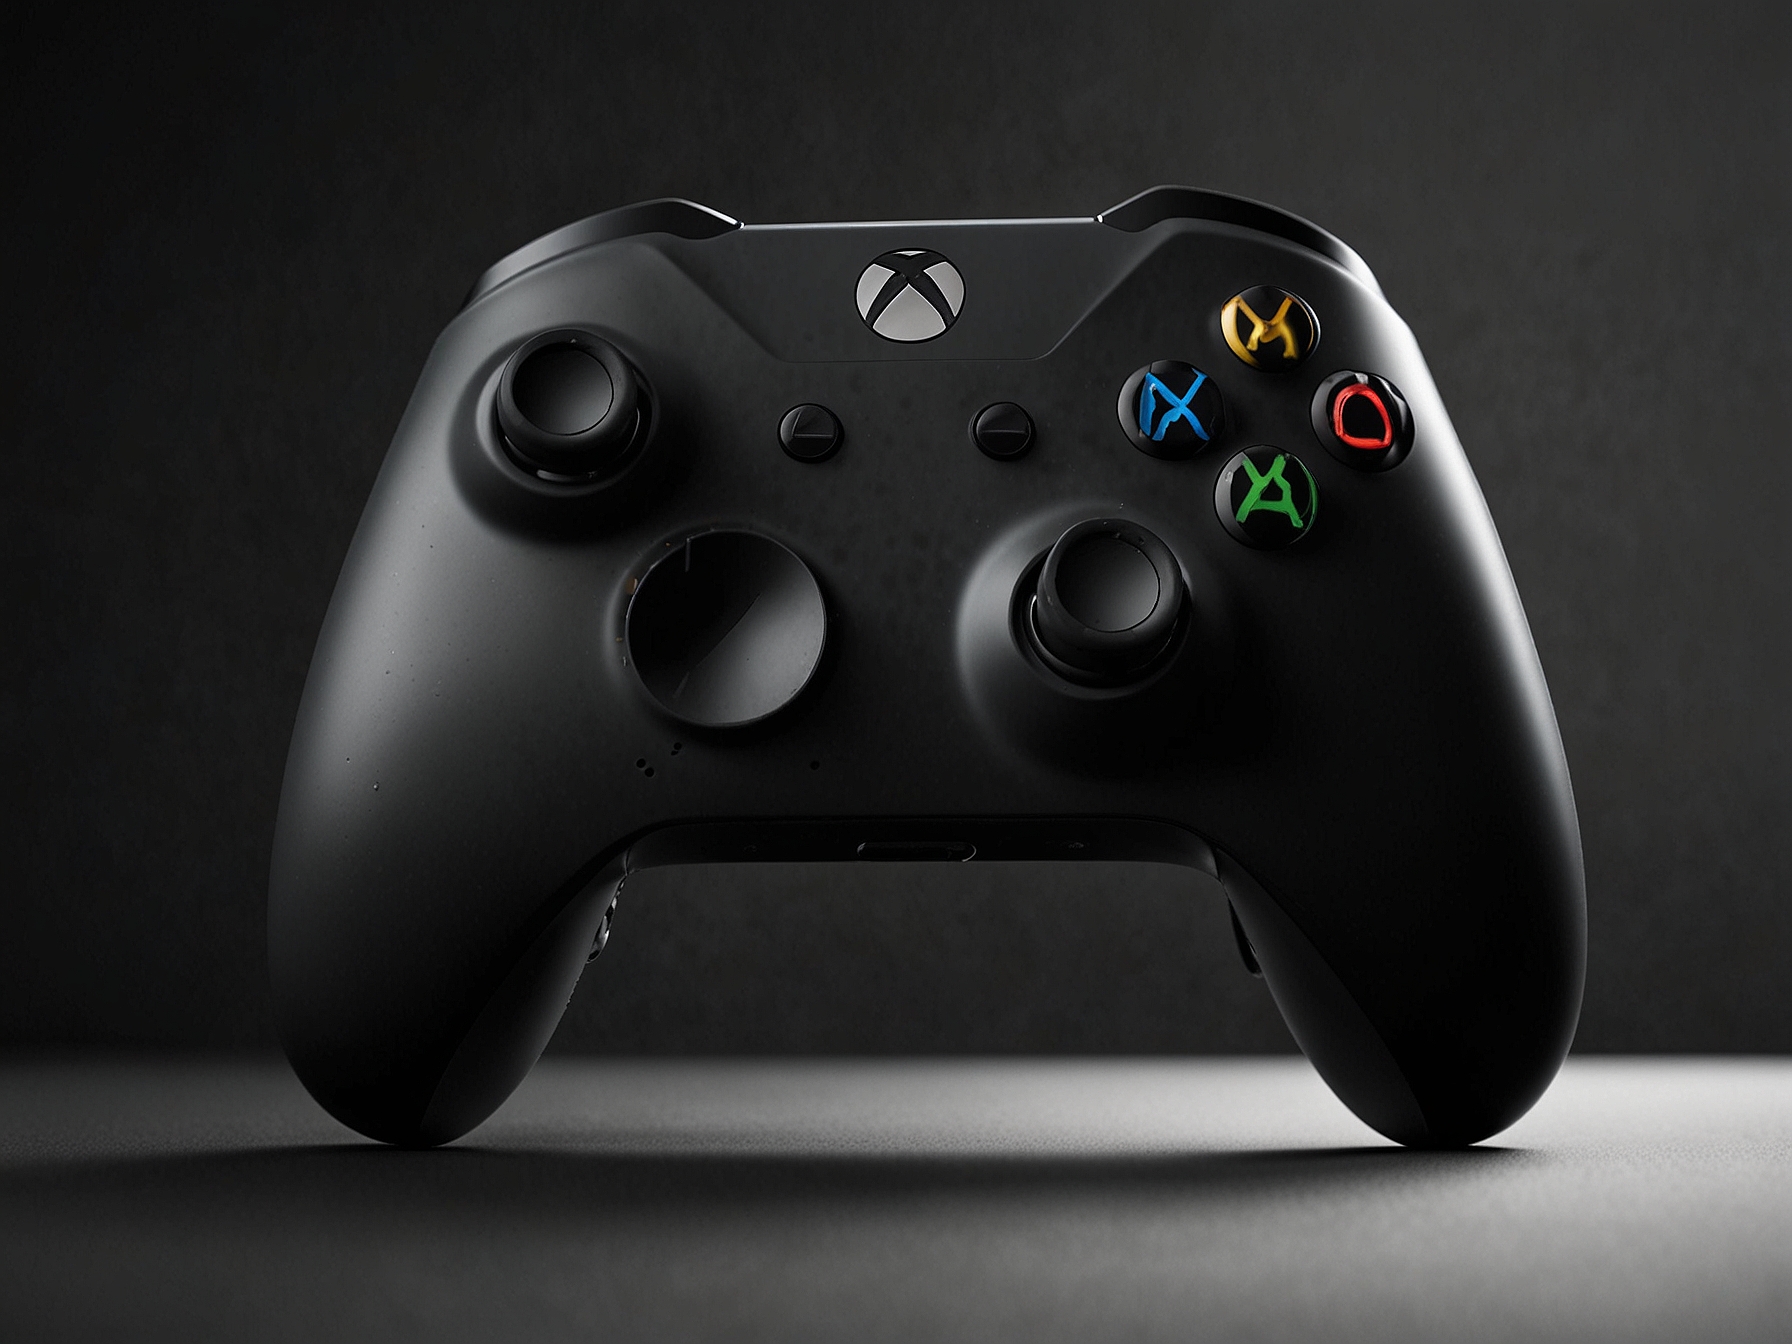 A close-up of the Xbox Elite Series 2 controller showing its adjustable-tension thumbsticks, rubberized grips, and re-engineered components designed for peak gaming performance.